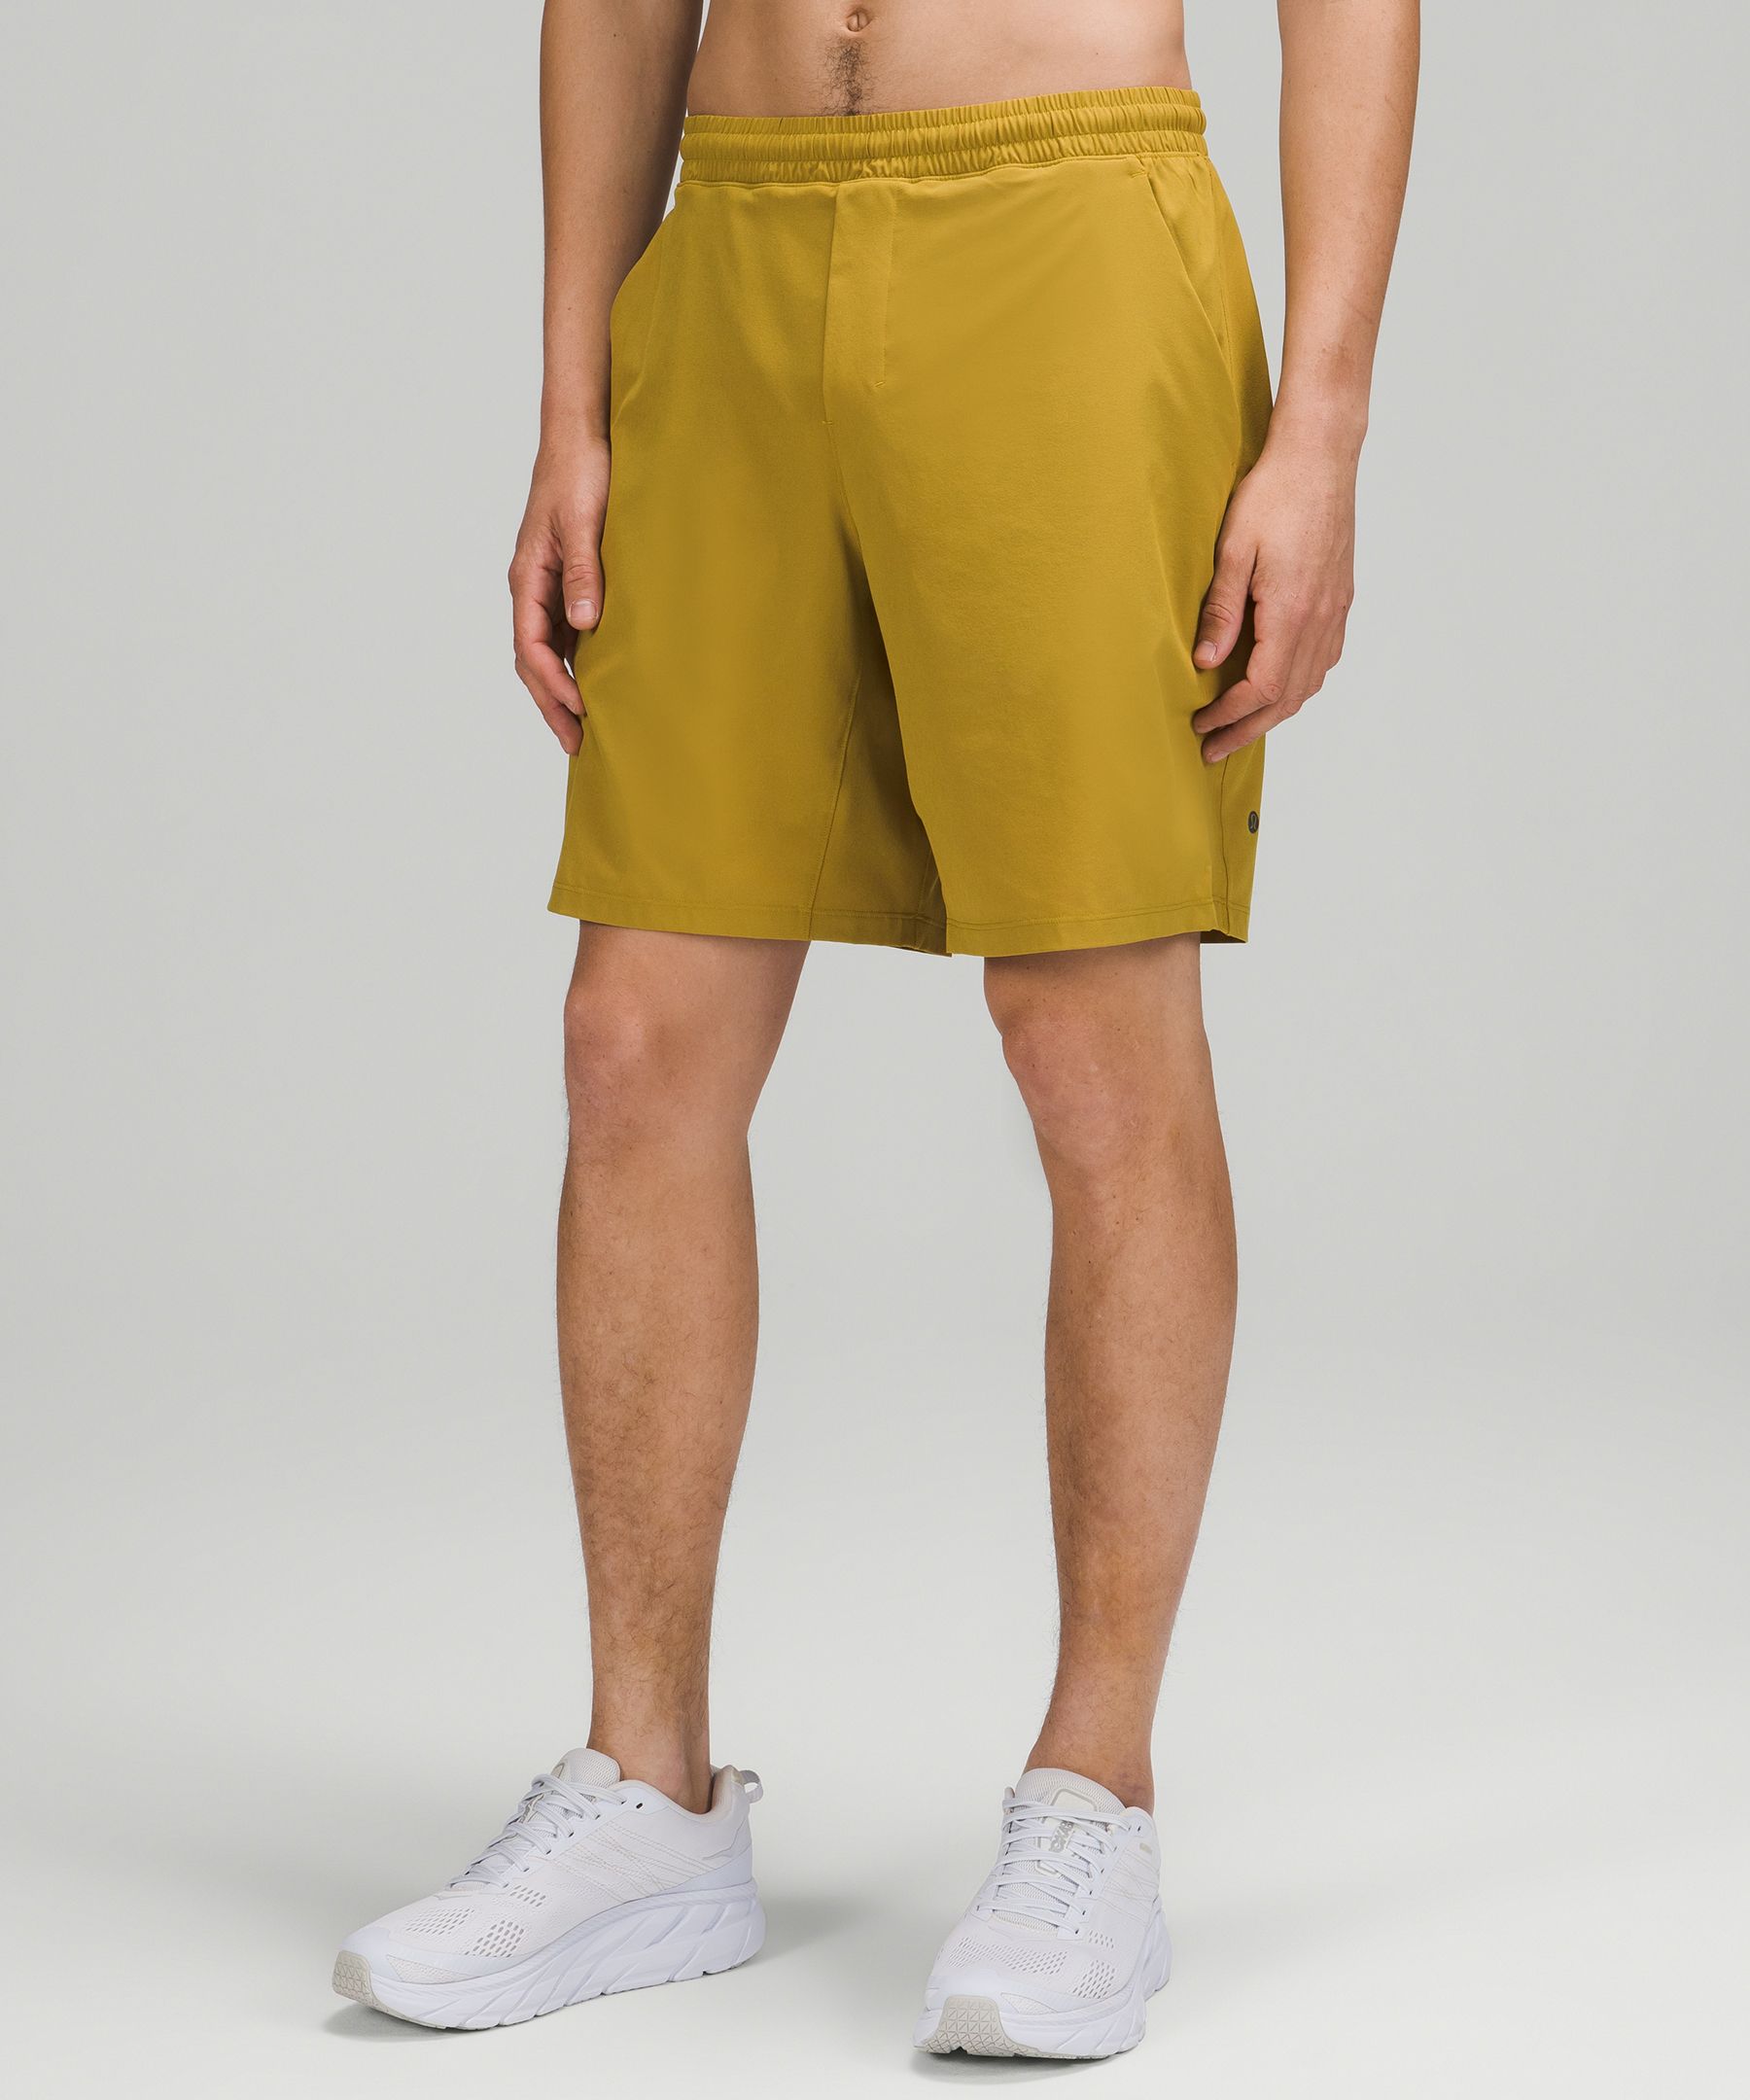 Lululemon Pace Breaker Lined Shorts 9" In Auric Gold